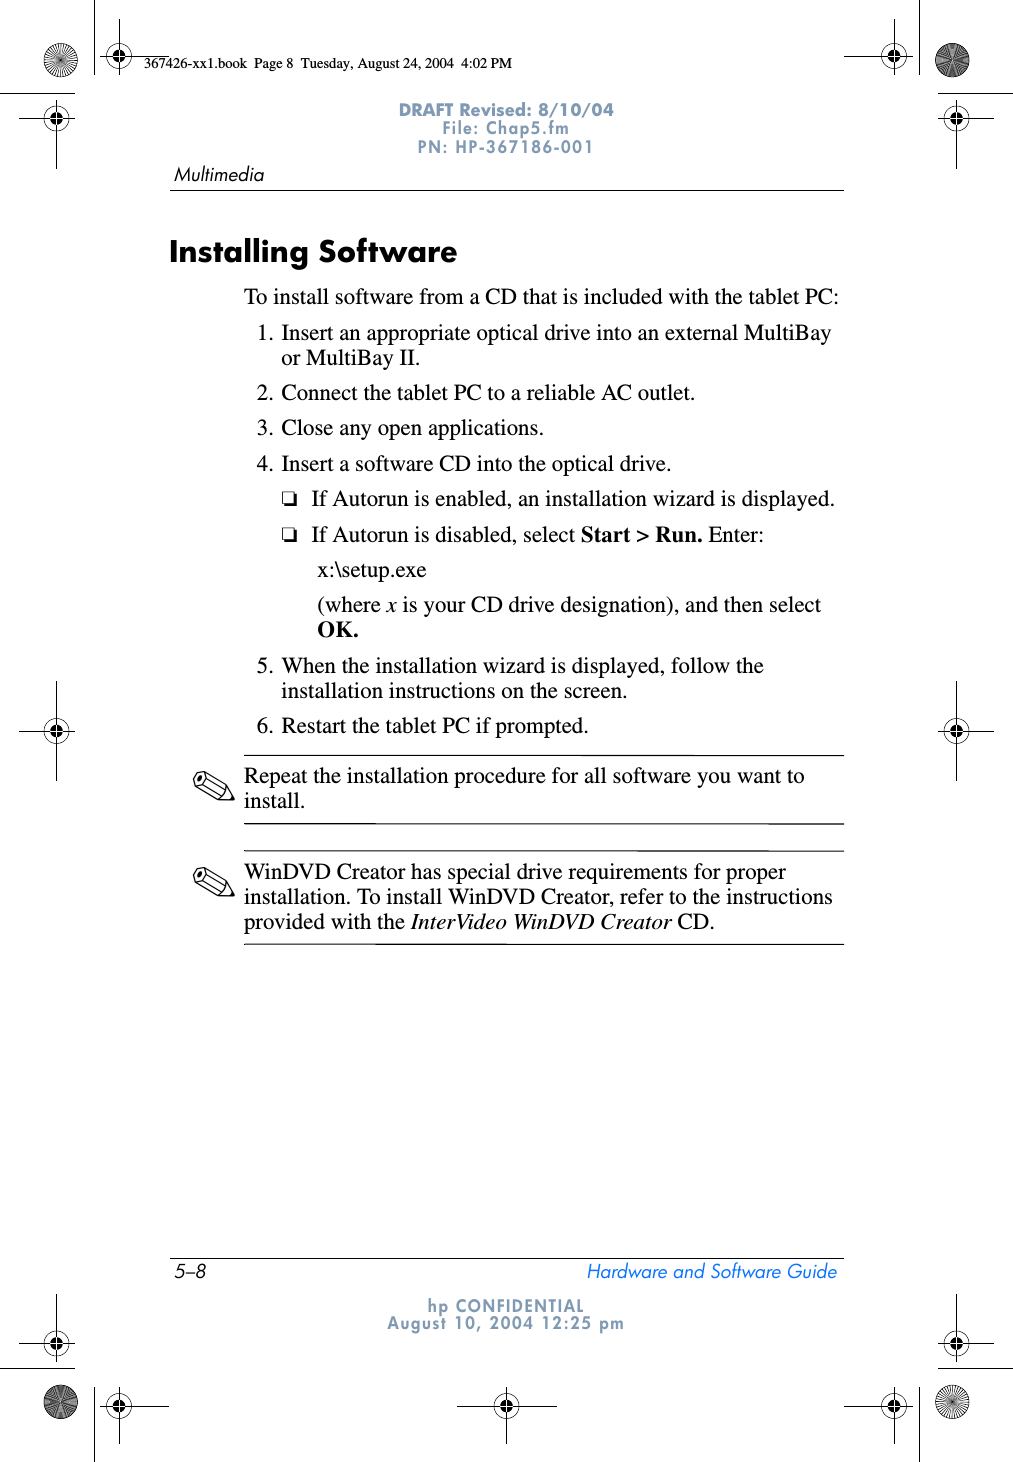 5–8 Hardware and Software GuideMultimediaDRAFT Revised: 8/10/04File: Chap5.fm PN: HP-367186-001 hp CONFIDENTIALAugust 10, 2004 12:25 pmInstalling SoftwareTo install software from a CD that is included with the tablet PC:1. Insert an appropriate optical drive into an external MultiBay or MultiBay II.2. Connect the tablet PC to a reliable AC outlet.3. Close any open applications.4. Insert a software CD into the optical drive.❏If Autorun is enabled, an installation wizard is displayed.❏If Autorun is disabled, select Start &gt; Run. Enter:x:\setup.exe(where x is your CD drive designation), and then select OK.5. When the installation wizard is displayed, follow the installation instructions on the screen.6. Restart the tablet PC if prompted.✎Repeat the installation procedure for all software you want to install.✎WinDVD Creator has special drive requirements for proper installation. To install WinDVD Creator, refer to the instructions provided with the InterVideo WinDVD Creator CD.367426-xx1.book  Page 8  Tuesday, August 24, 2004  4:02 PM